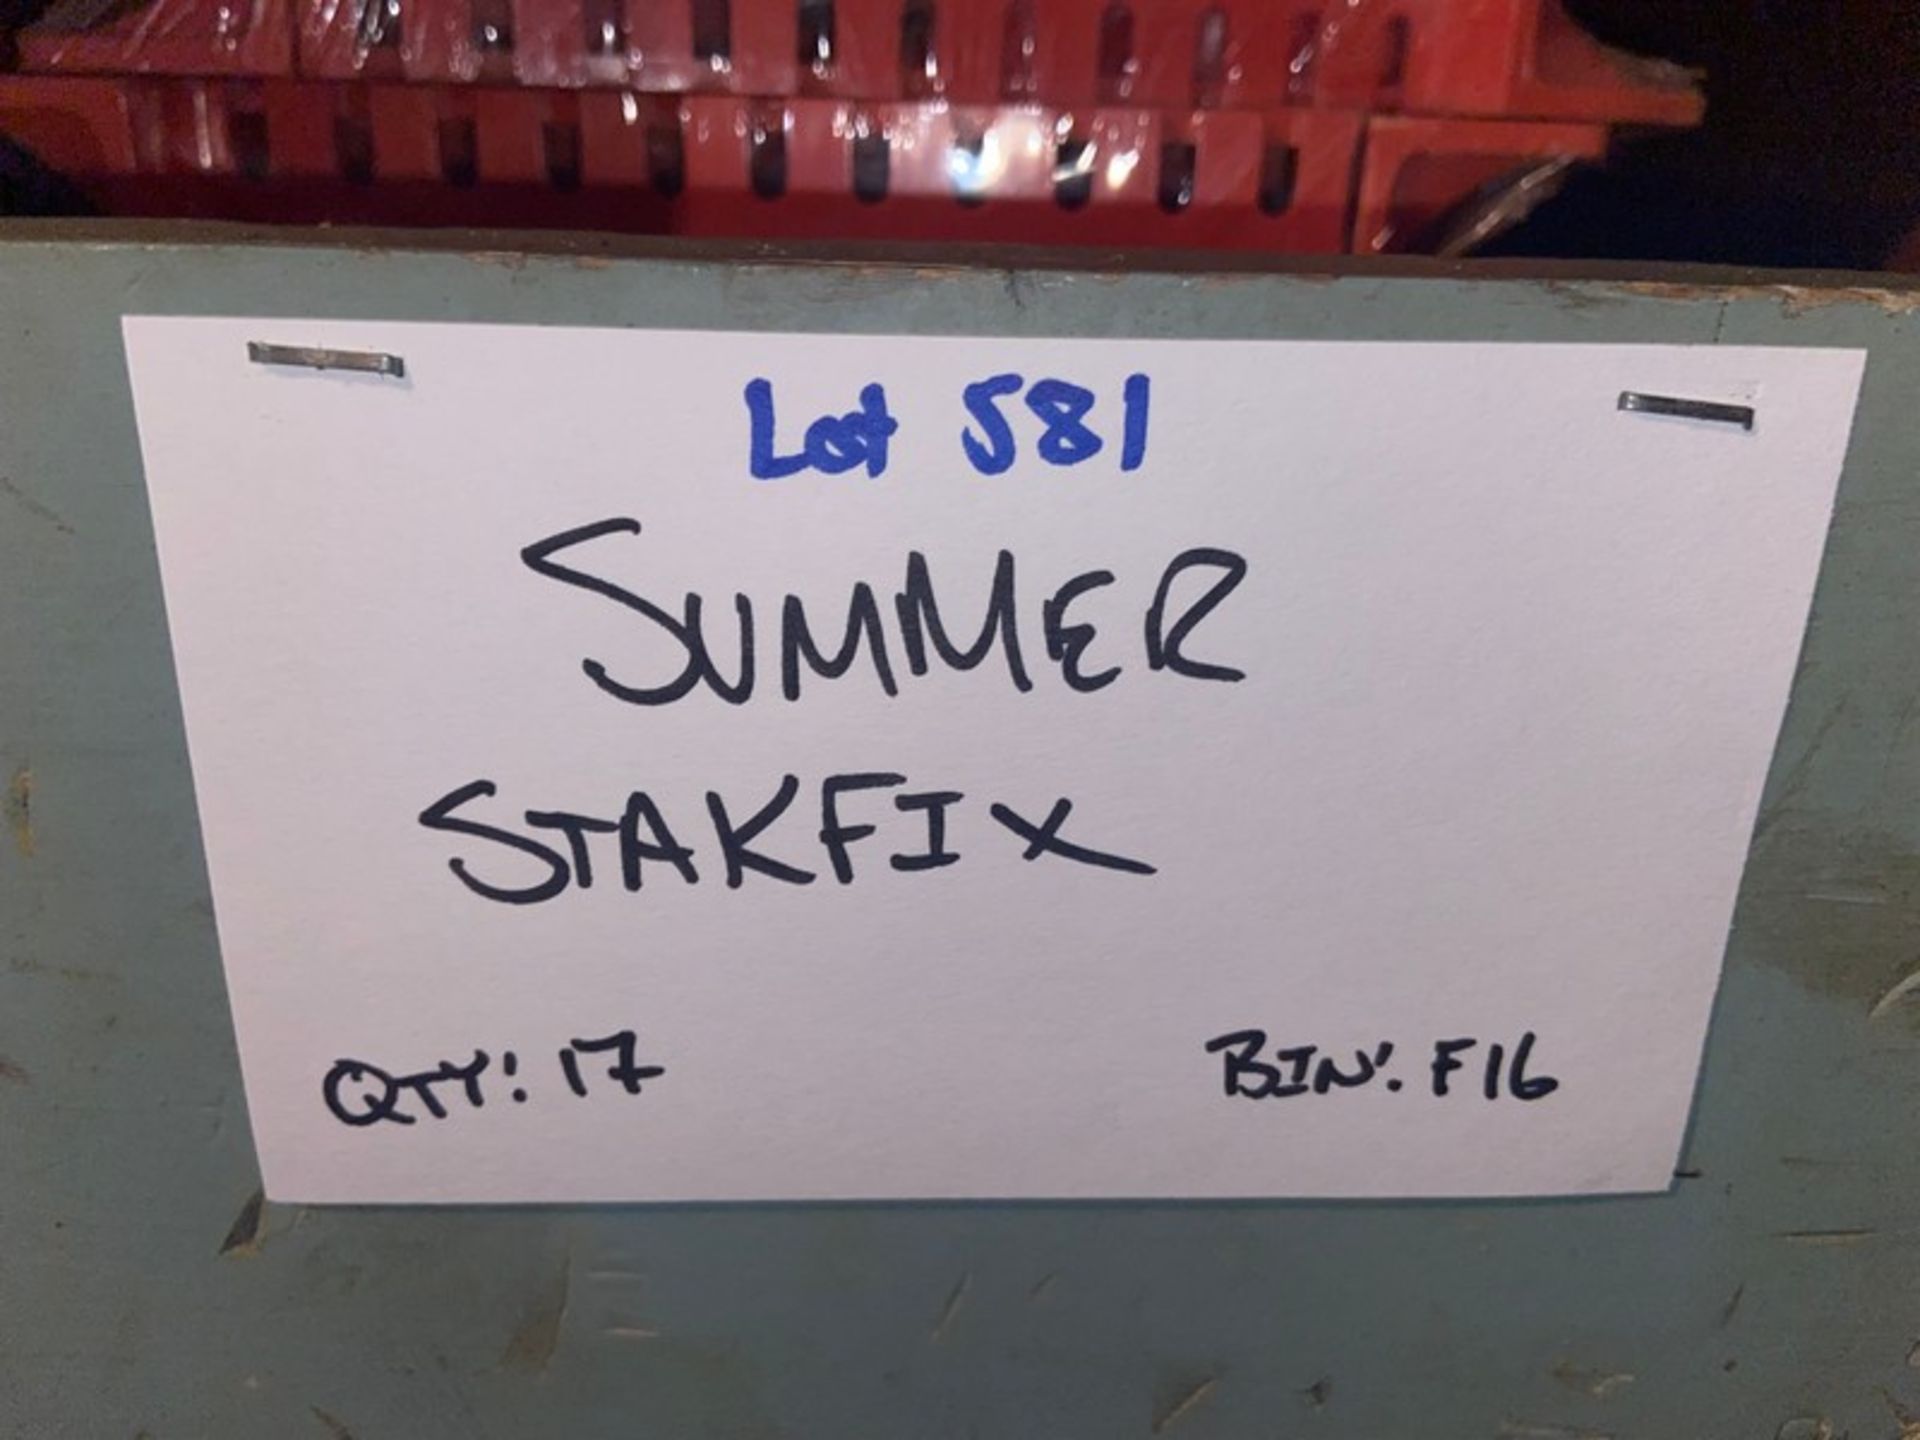 (17) Summer Stakfix (Bin:F16) (LOCATED IN MONROEVILLE, PA) - Image 5 of 5